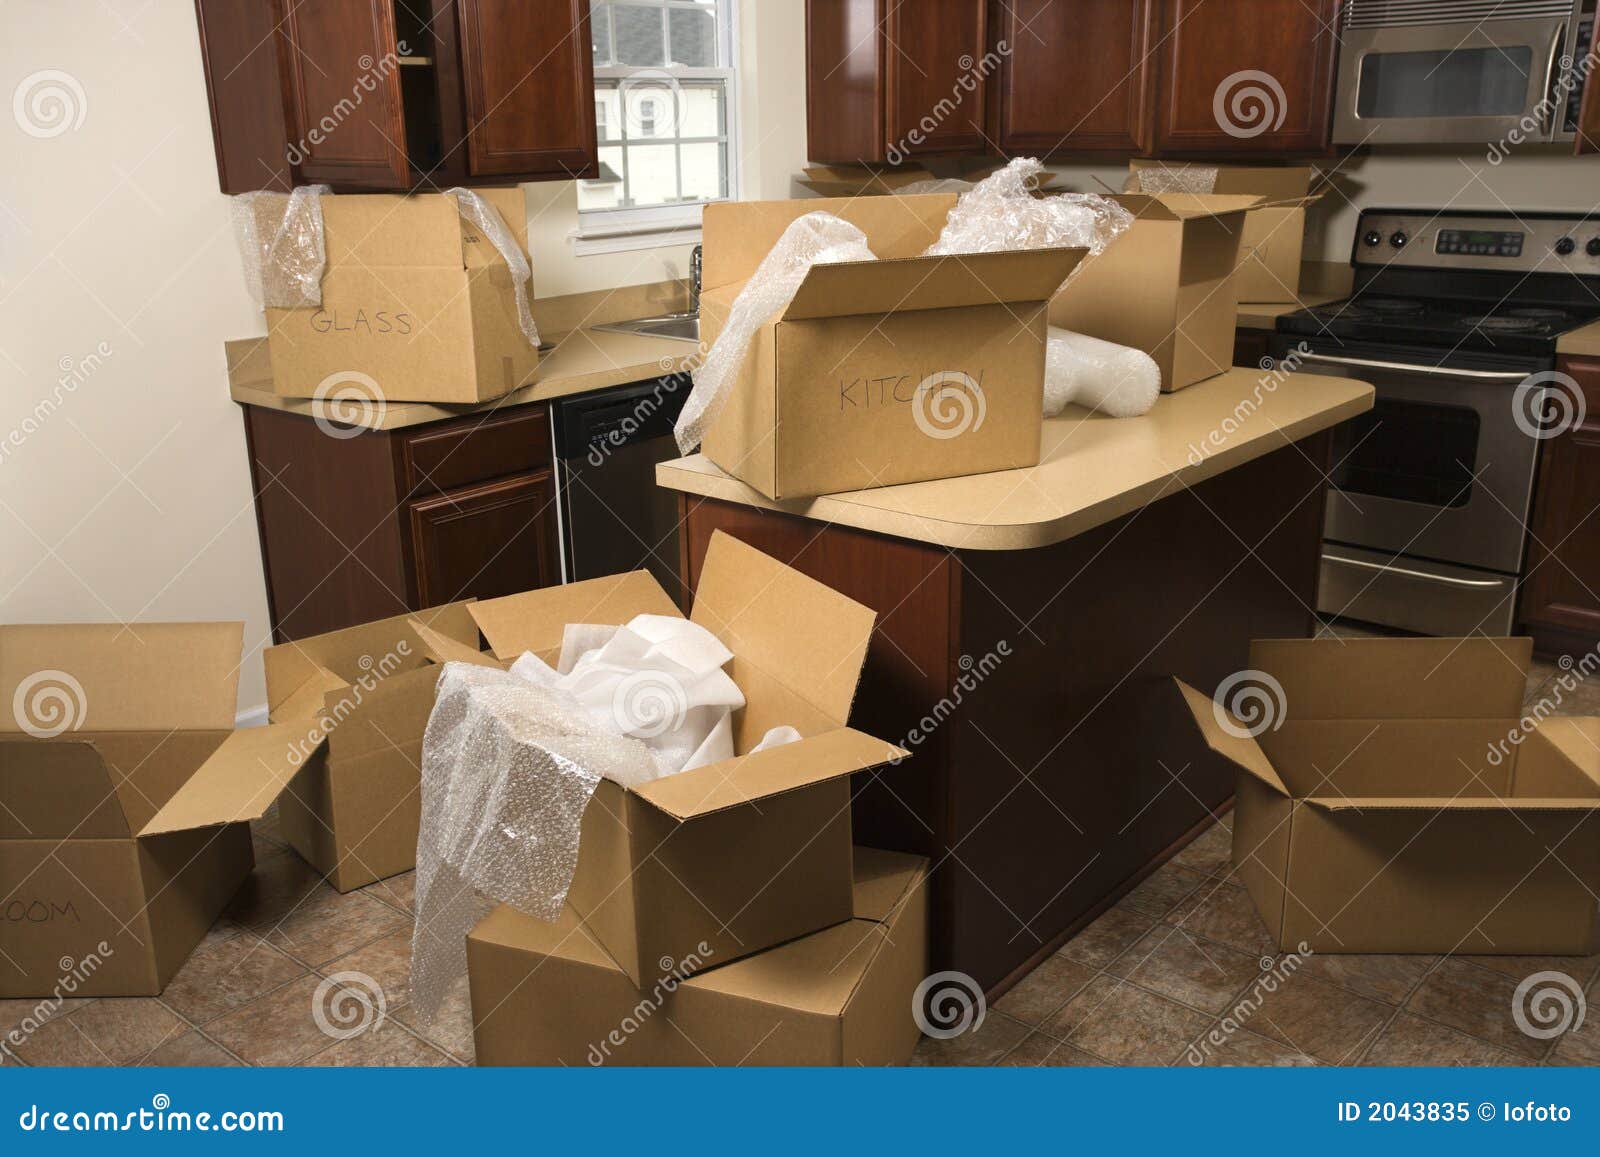 moving boxes in kitchen.